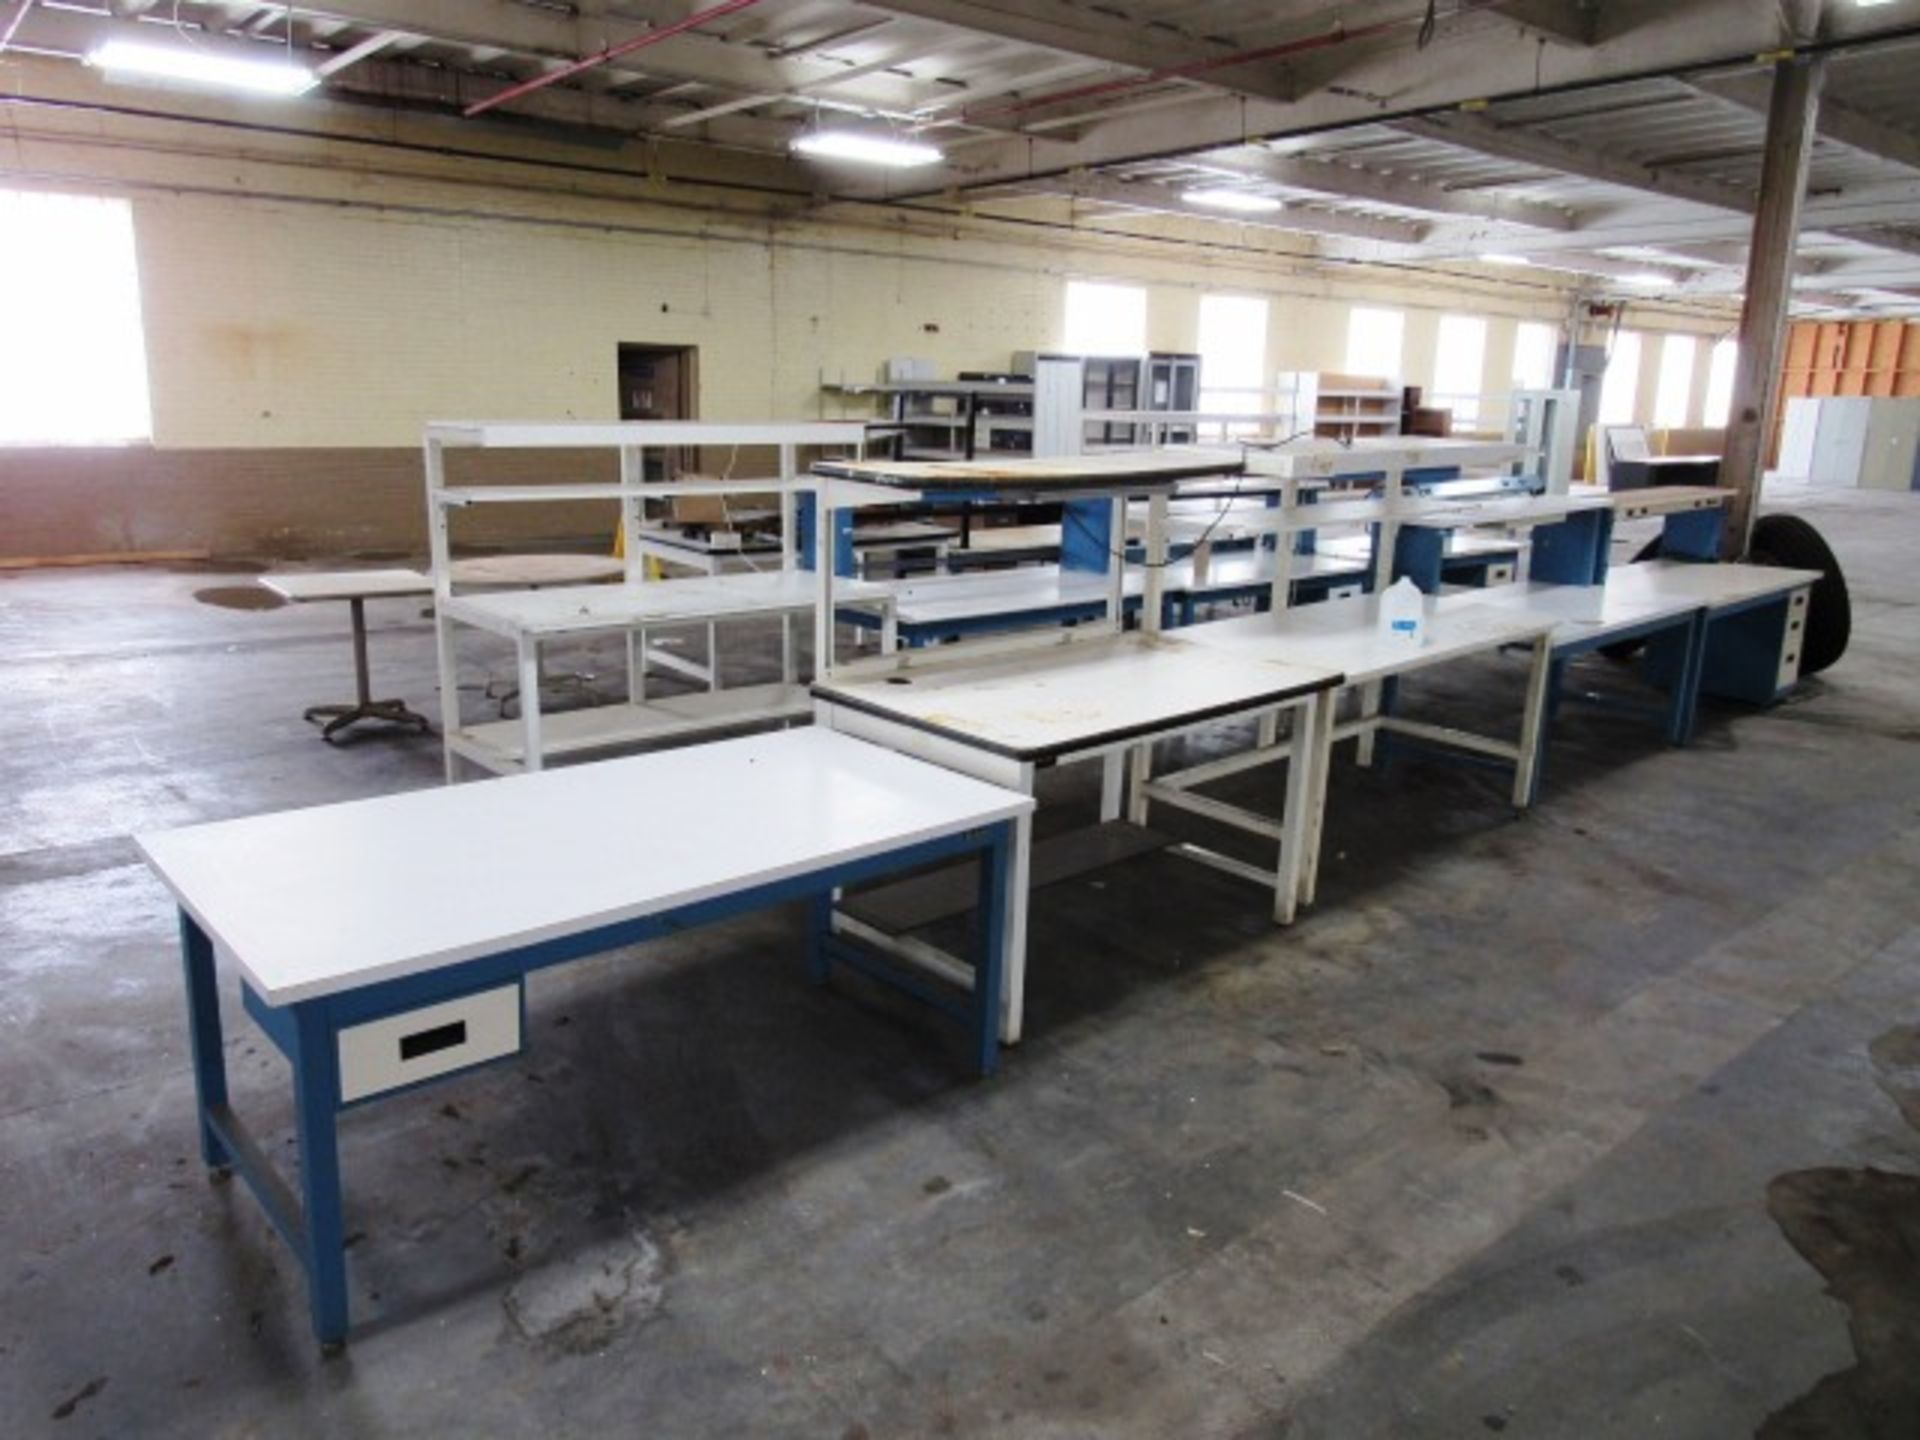 (2) Workbenches include (10) Lab Benches